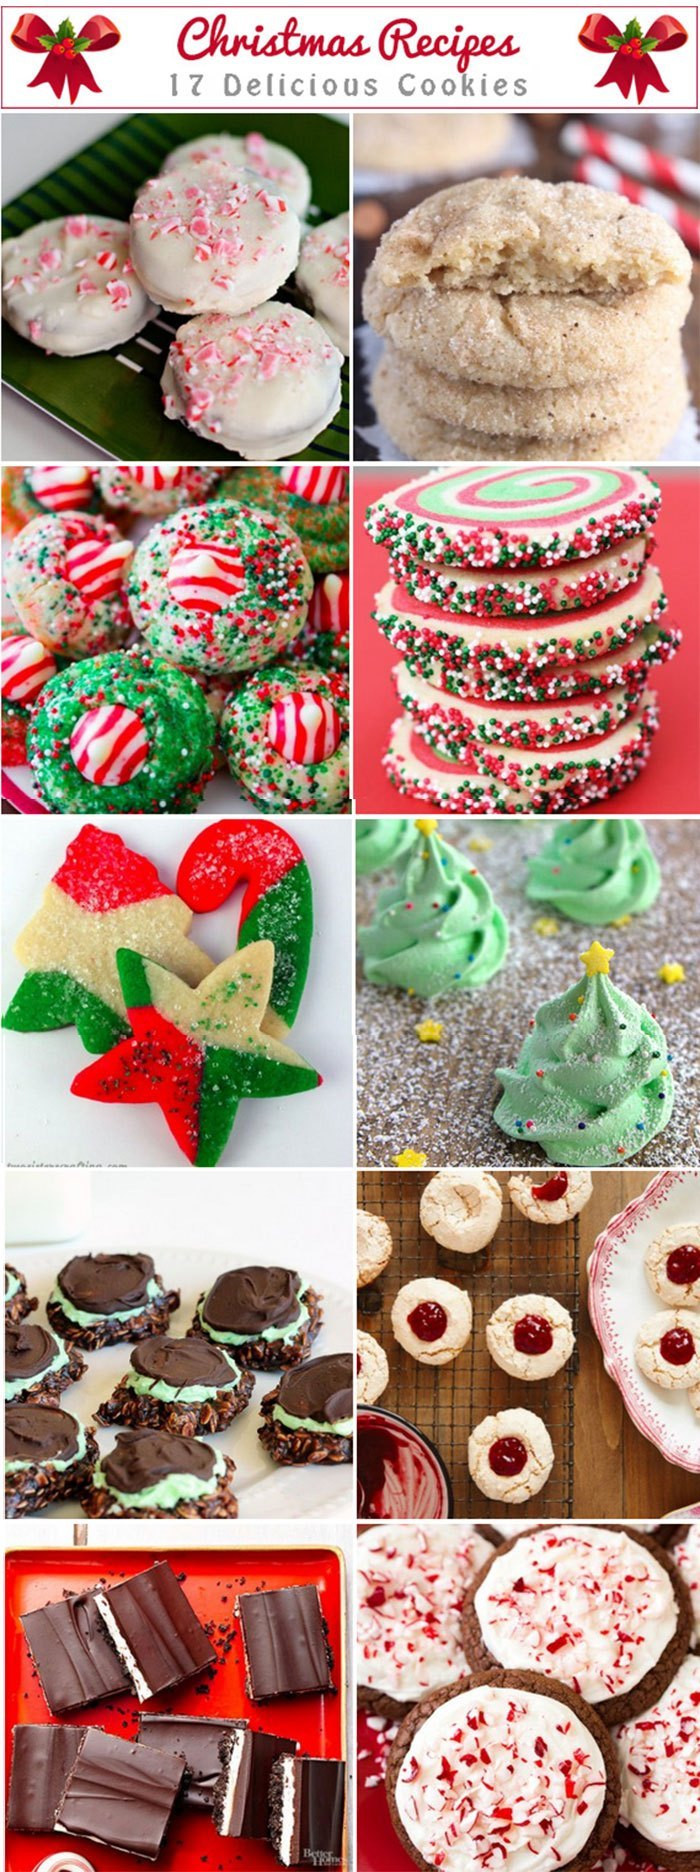 Delicious Christmas Cookies
 Easy Italian Recipes – The best Italian recipes easy to